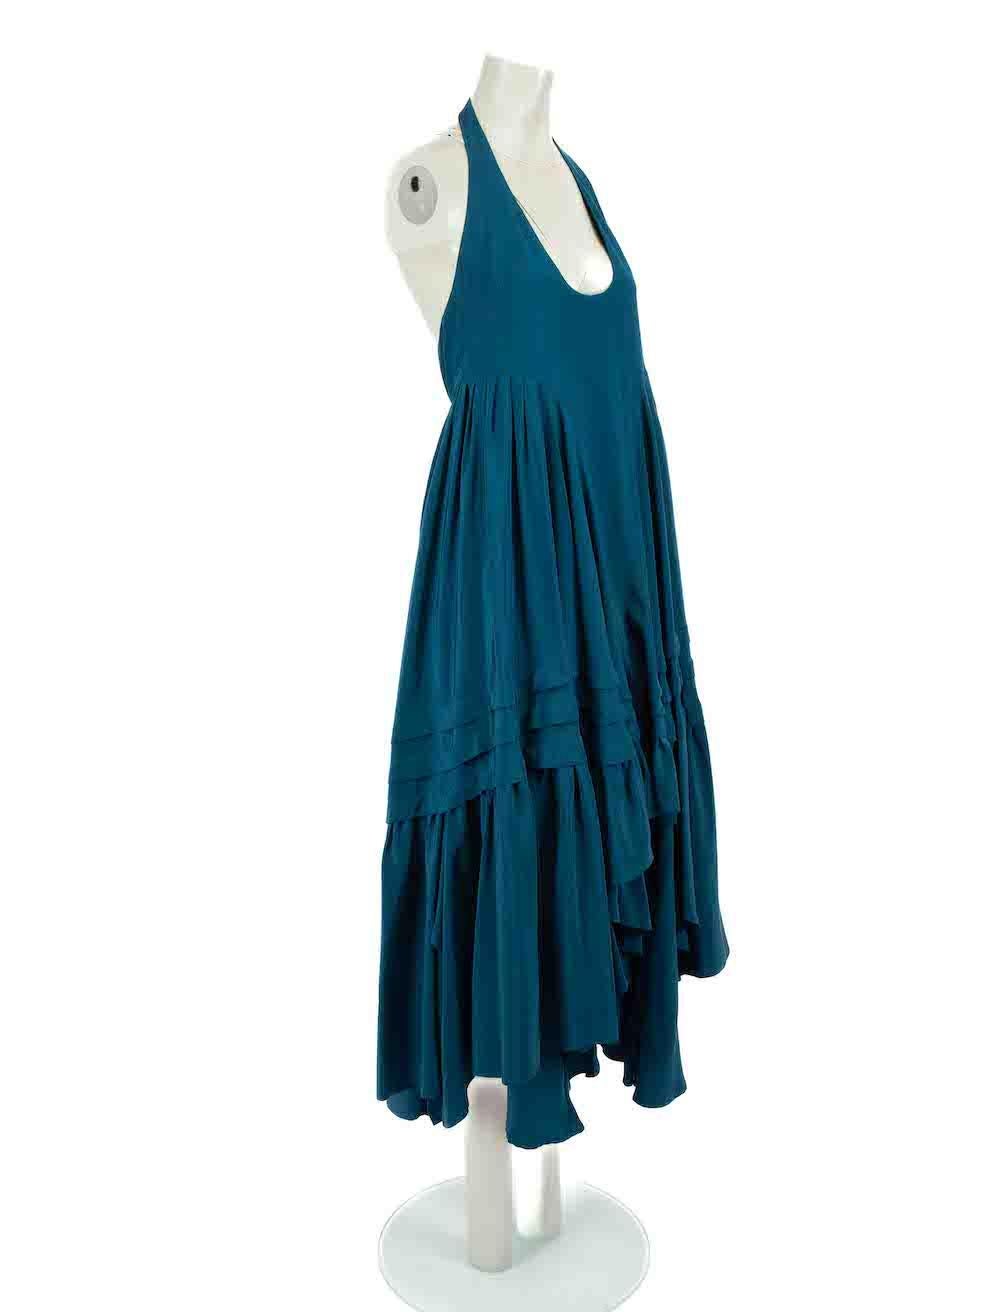 CONDITION is Very good. Minimal wear to dress is evident. Minimal loose threads to seam of ruffles on this used Balenciaga designer resale item.
 
Details
Teal
Silk
Gown
Open back
Halterneck
Maxi
Pleated
Tiered skirt
Side zip and hook